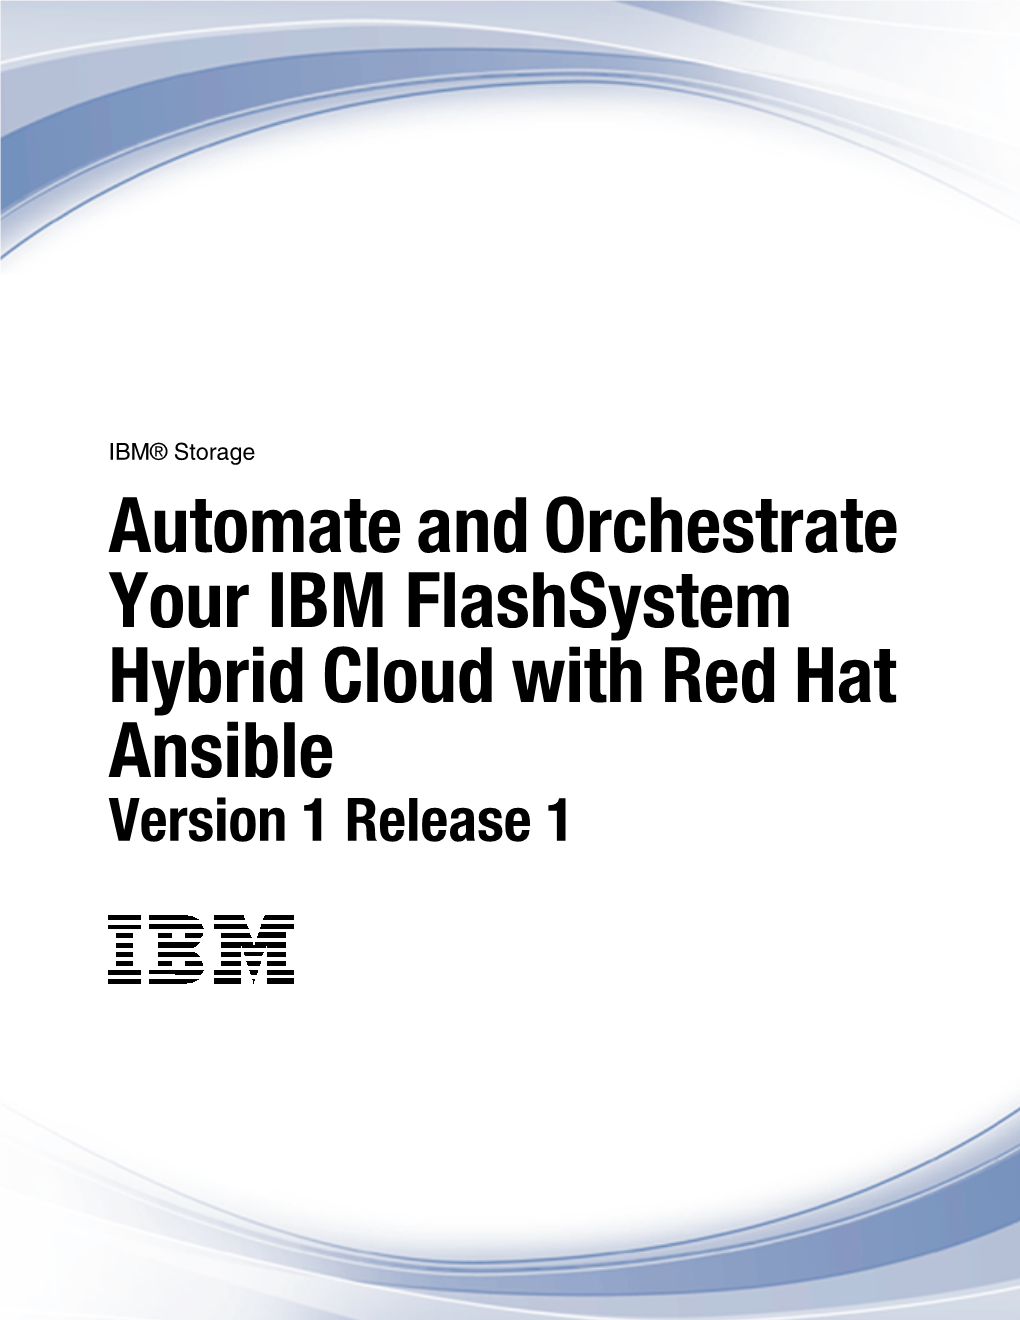 Automate and Orchestrate Your IBM Flashsystem Hybrid Cloud with Red Hat Ansible Version 1 Release 1 © Copyright International Business Machines Corporation 2020